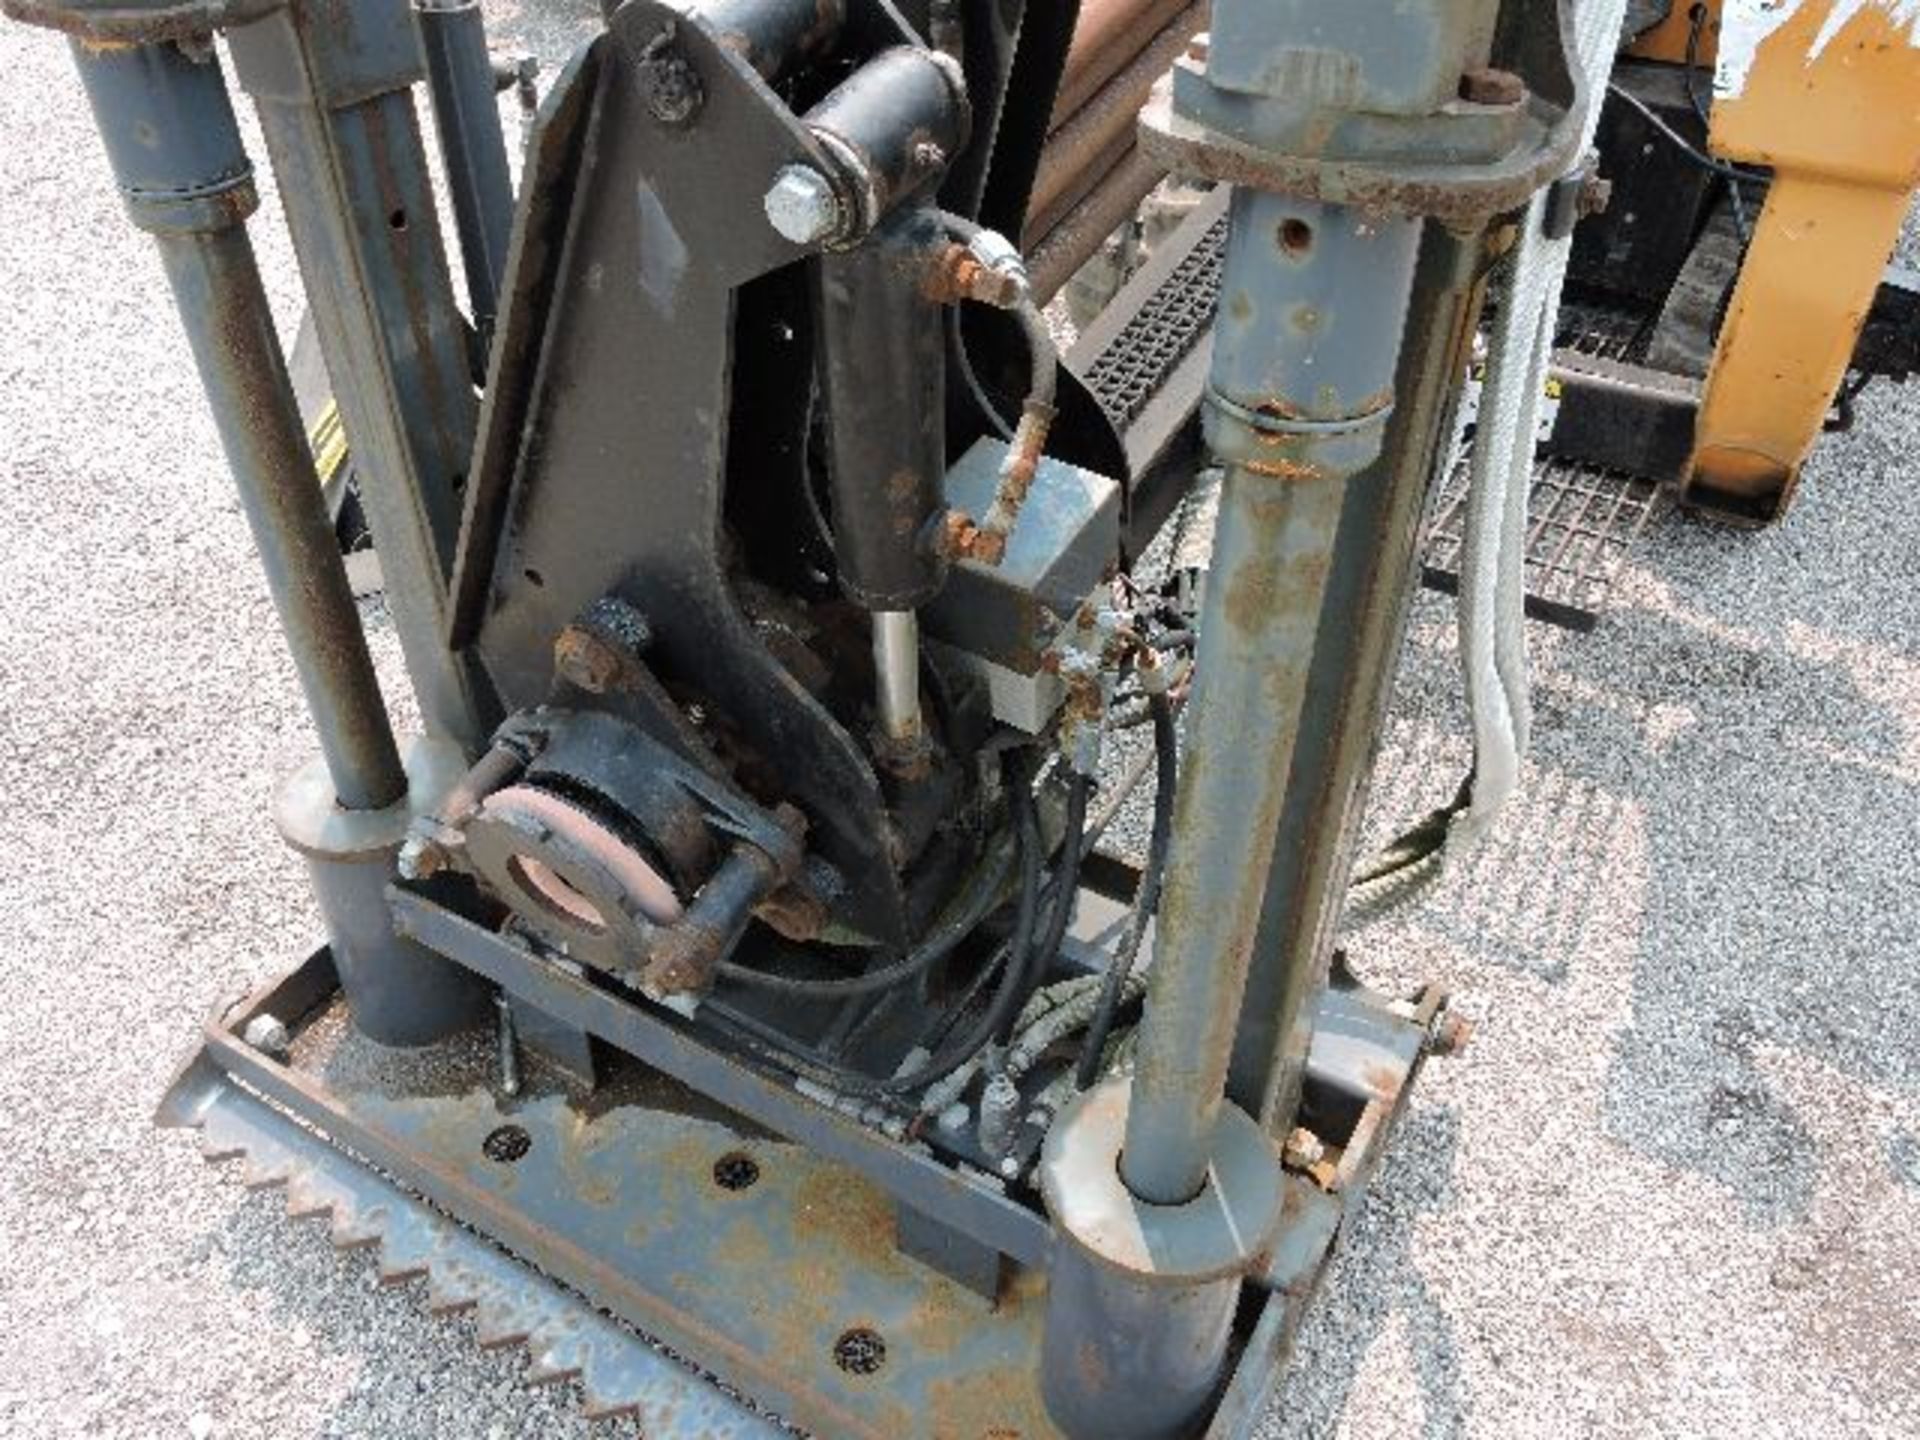 Case Boring Machine, Model 200TX, S/N 200TX-020196, Machine Comes With 15 Pcs. Of Boring Rod. - Image 6 of 11